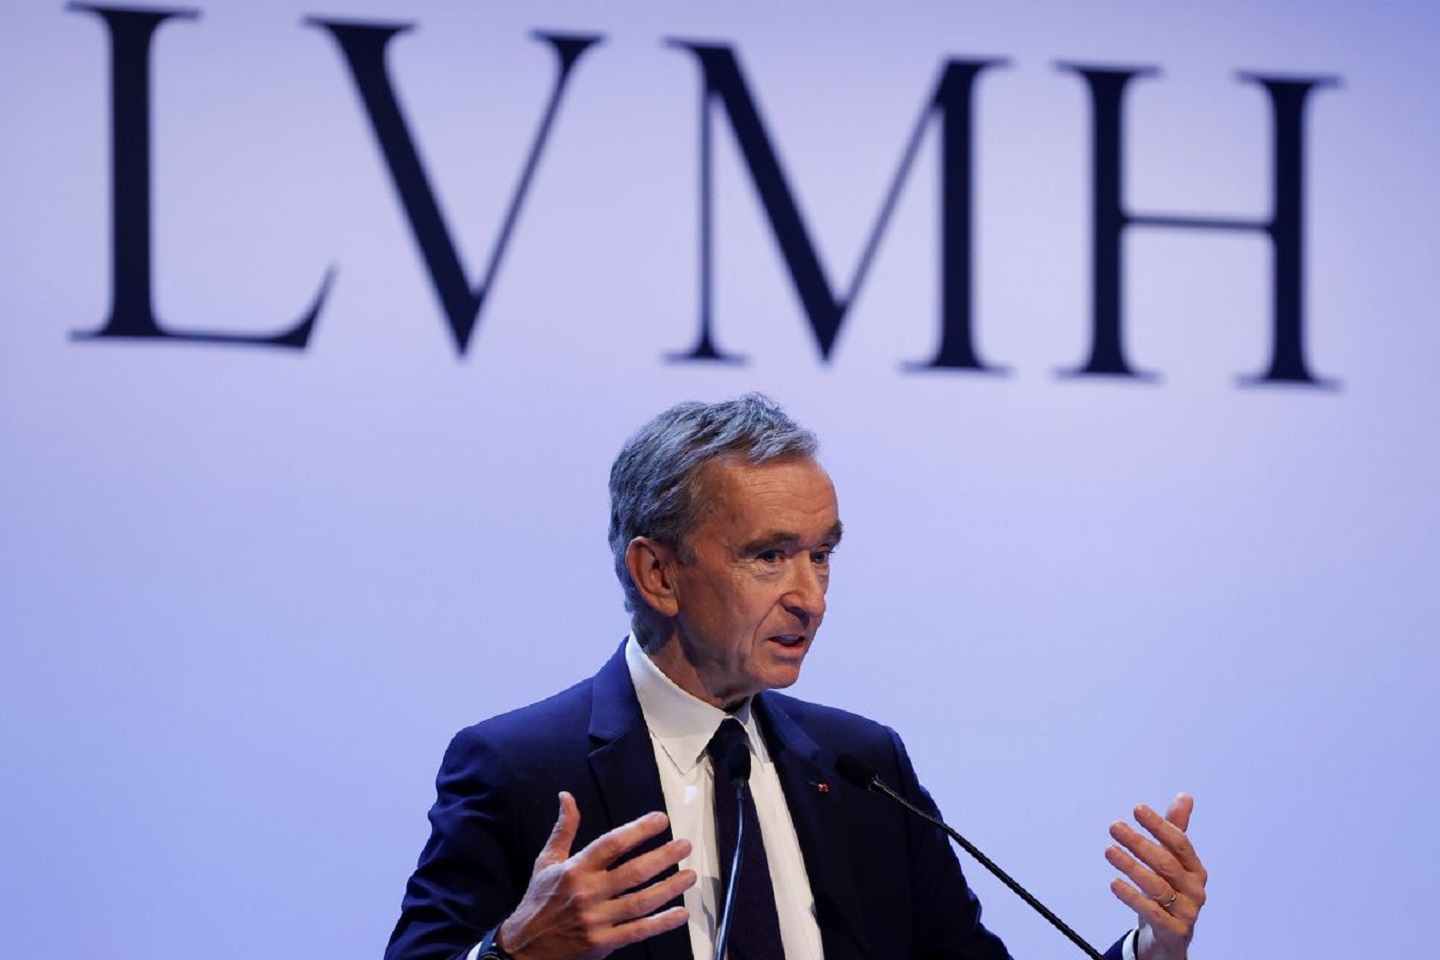 Tax the rich in France? Louis Vuitton CEO saying au revoir